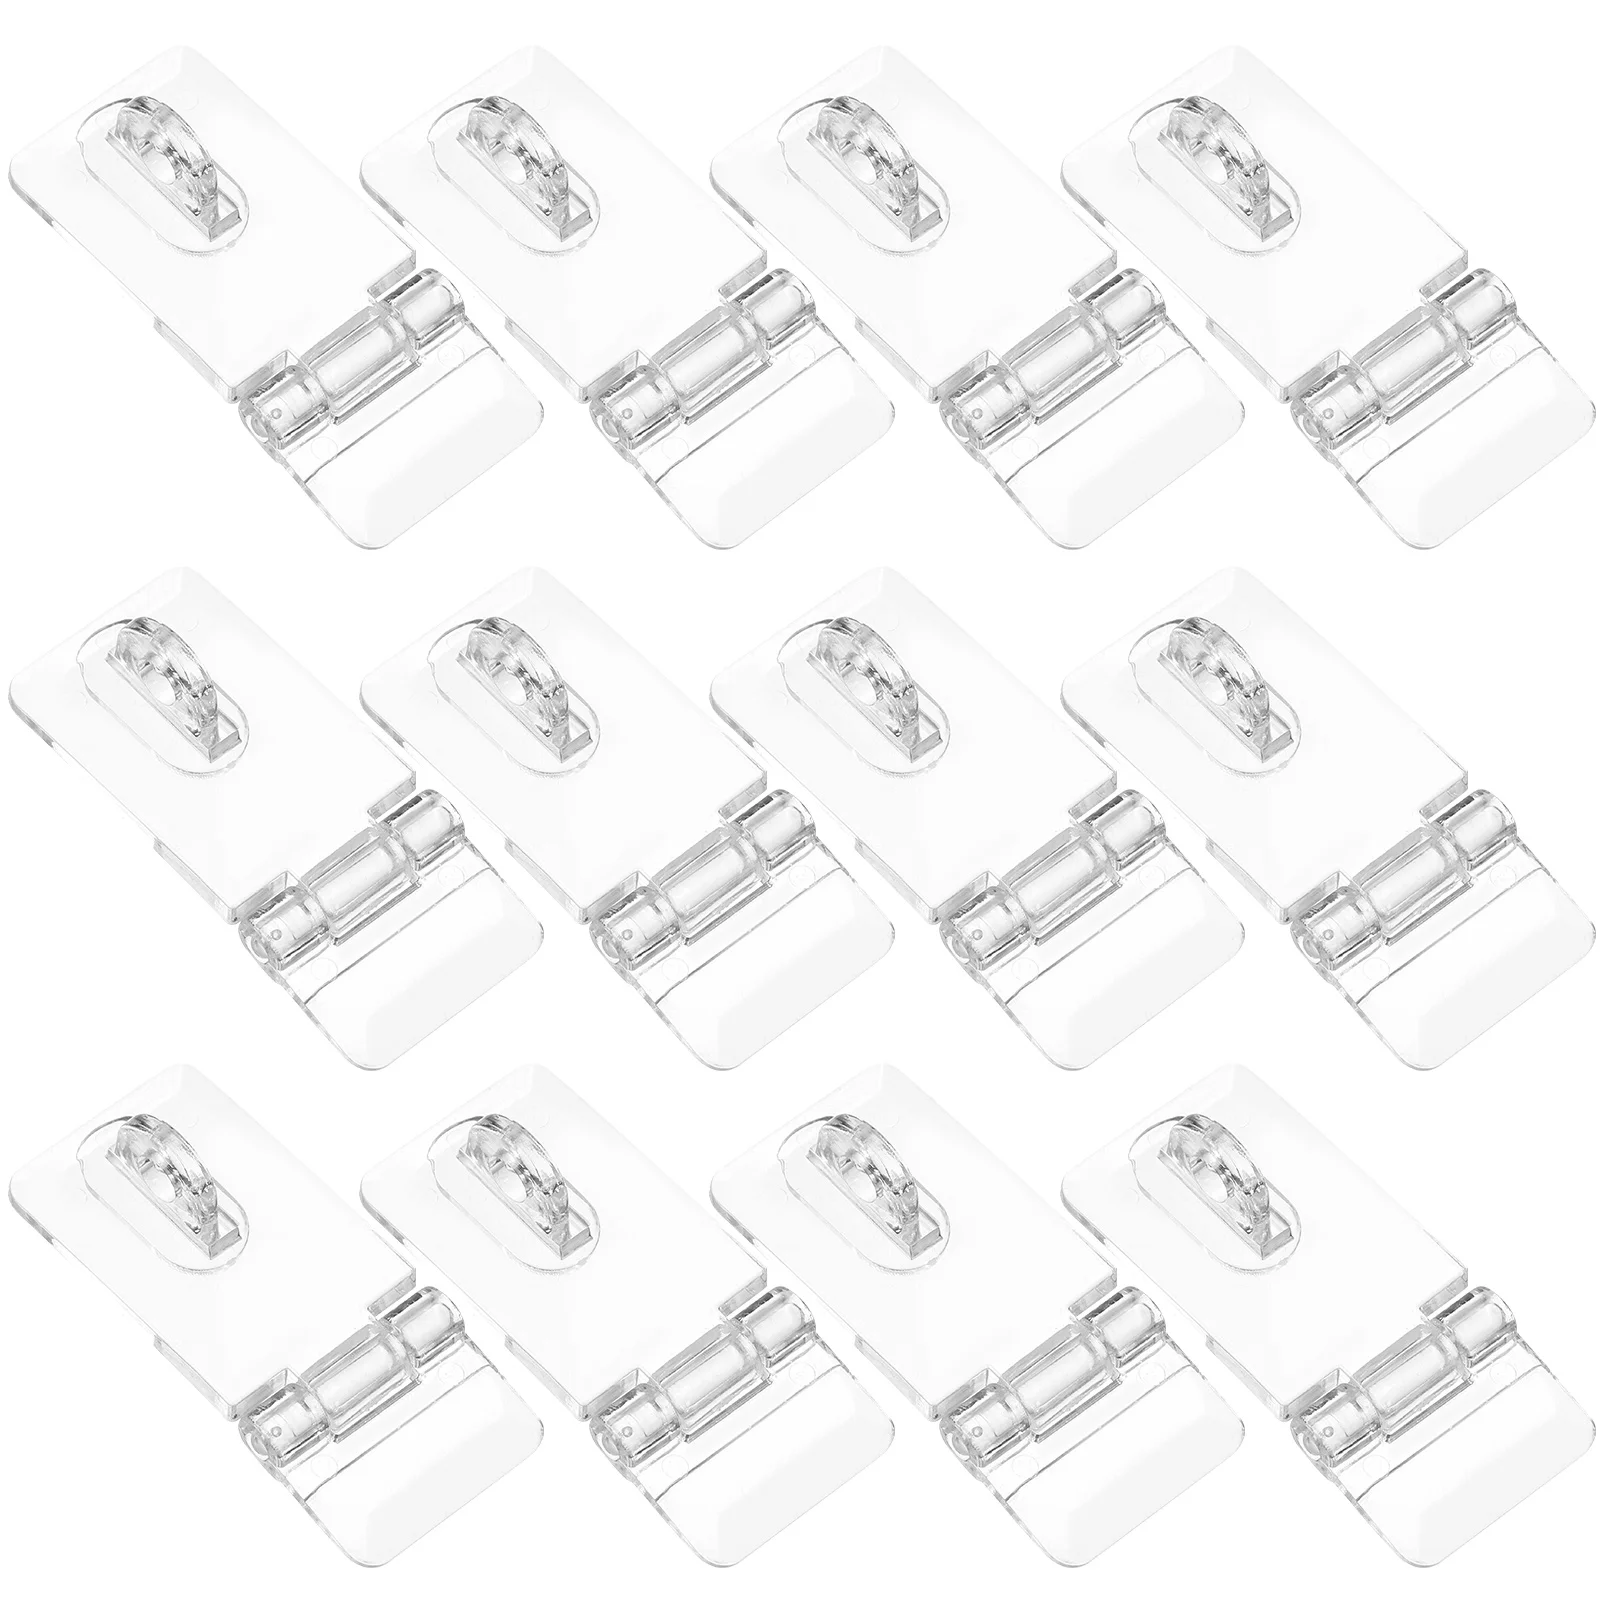 

12 Sets Transparent Lock Hinges Kitchen Cabinets Acrylic Hasp Buckles Padlock Latch Suitcase Clear Plastic Latches Hasps Locks